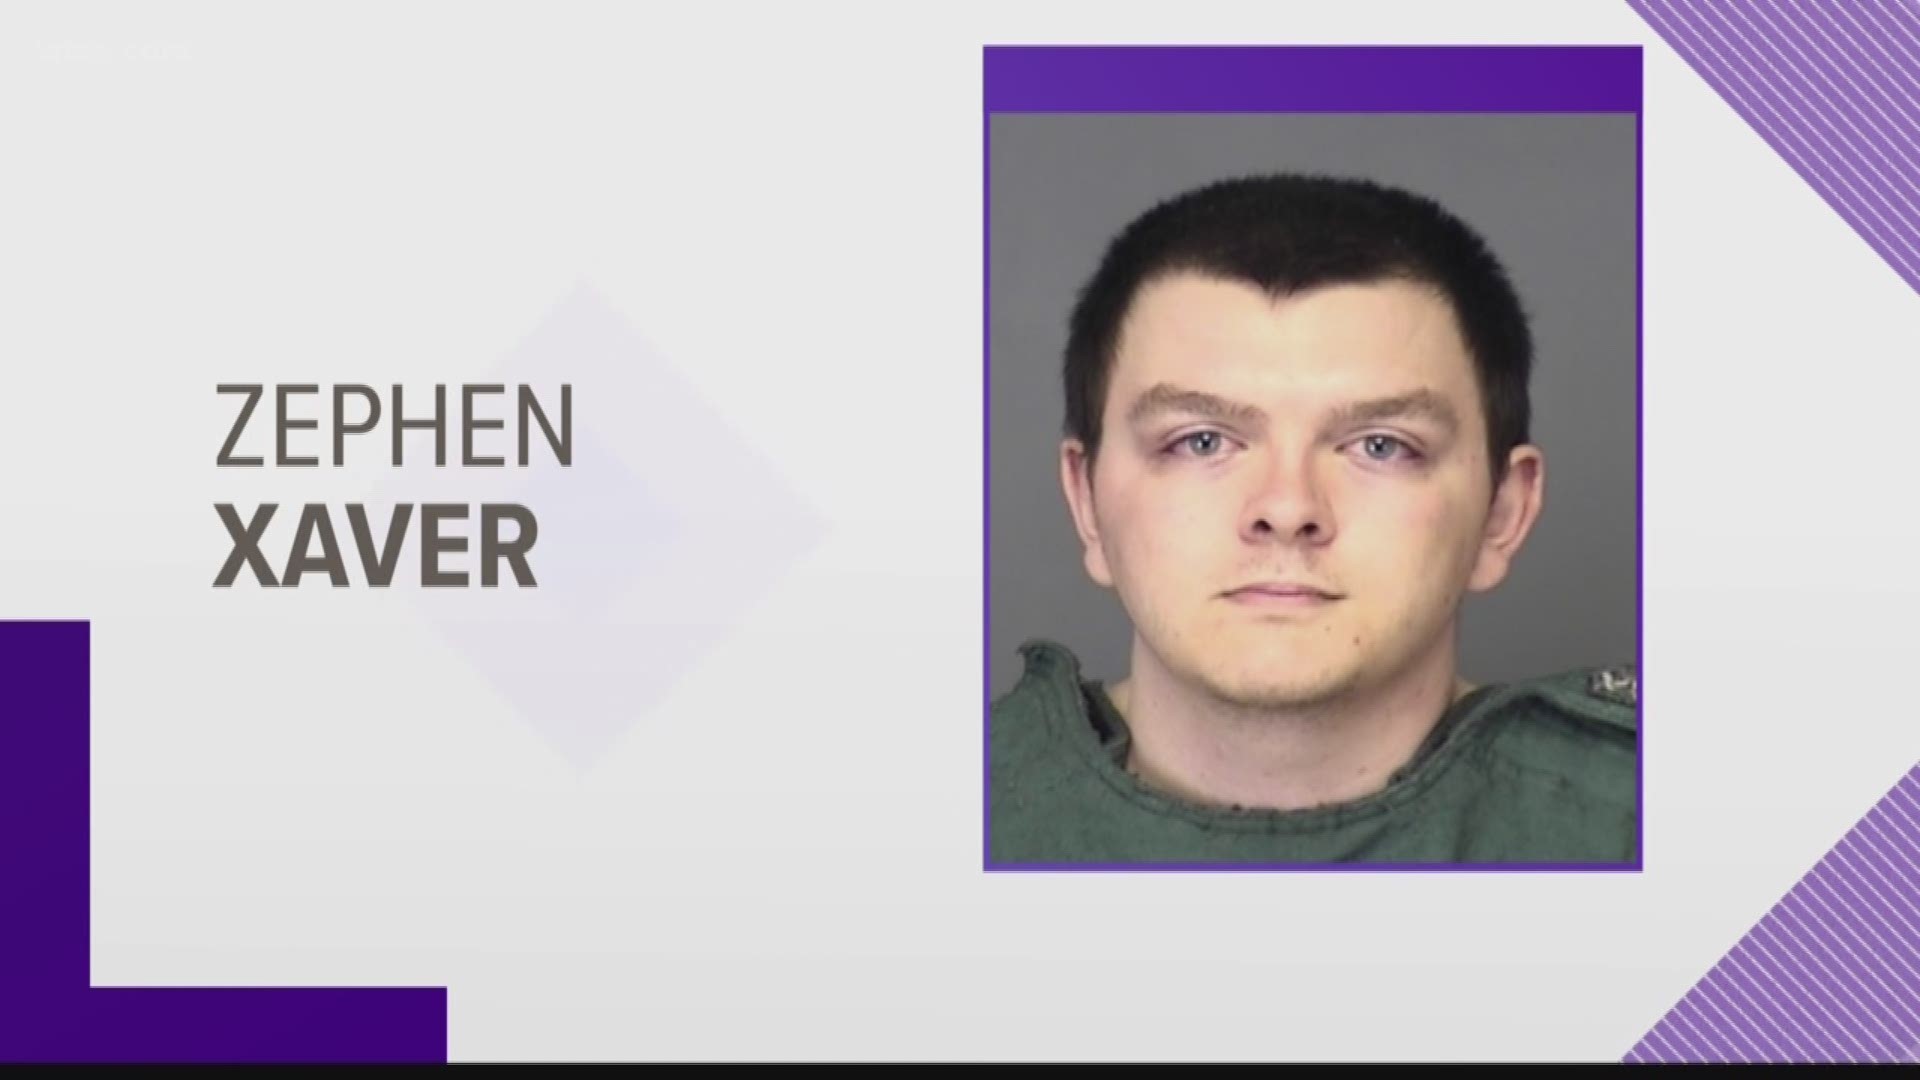 Zephen Xaver was put under observation after he told school officials he dreamed about killing students in 2014.